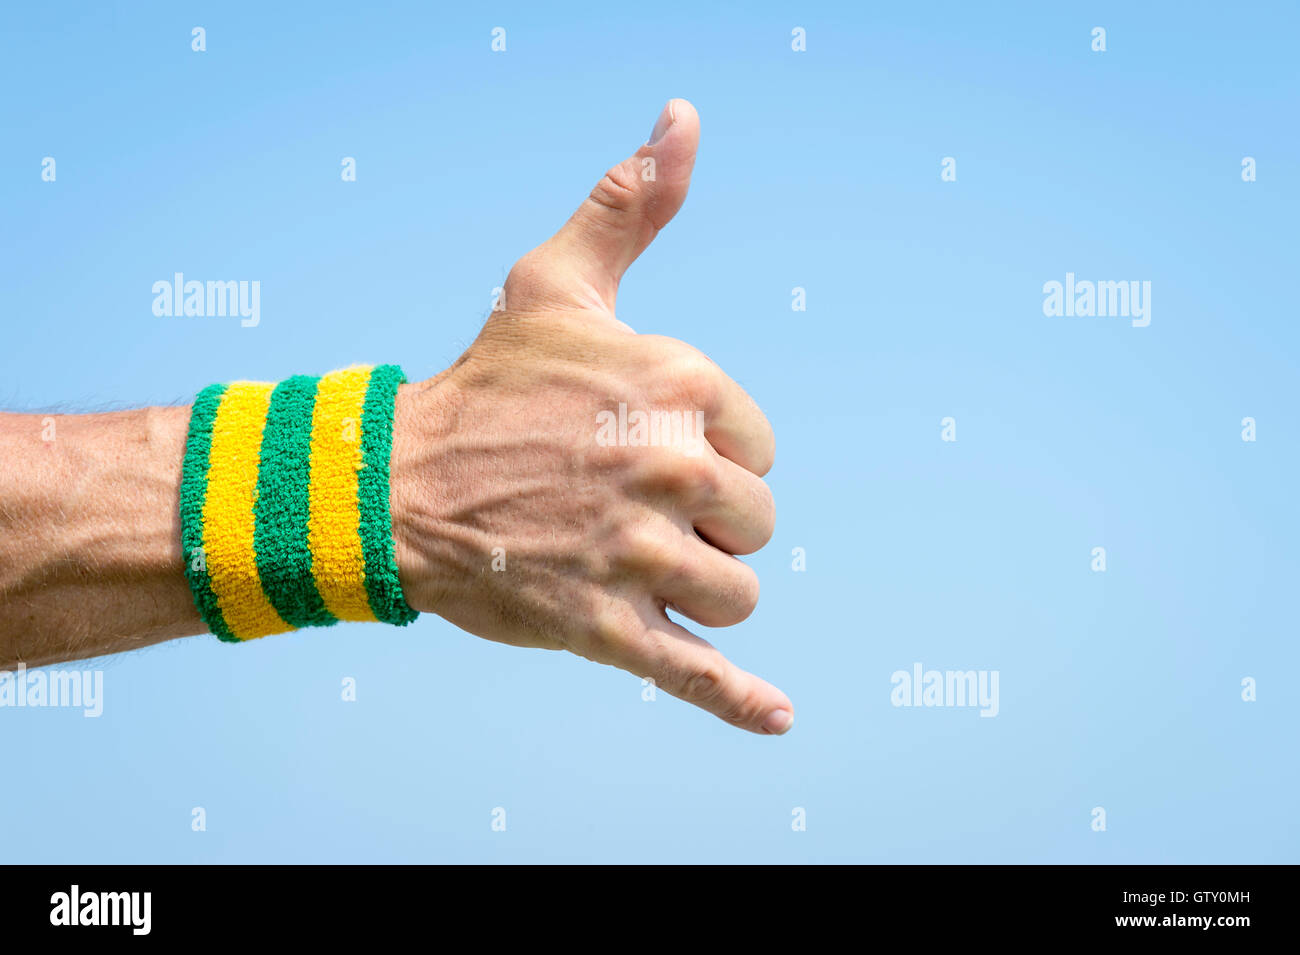 Athlete hand with yellow and green Brazil colors wristband giving a classic  shaka surfer sign against blue sky Stock Photo - Alamy